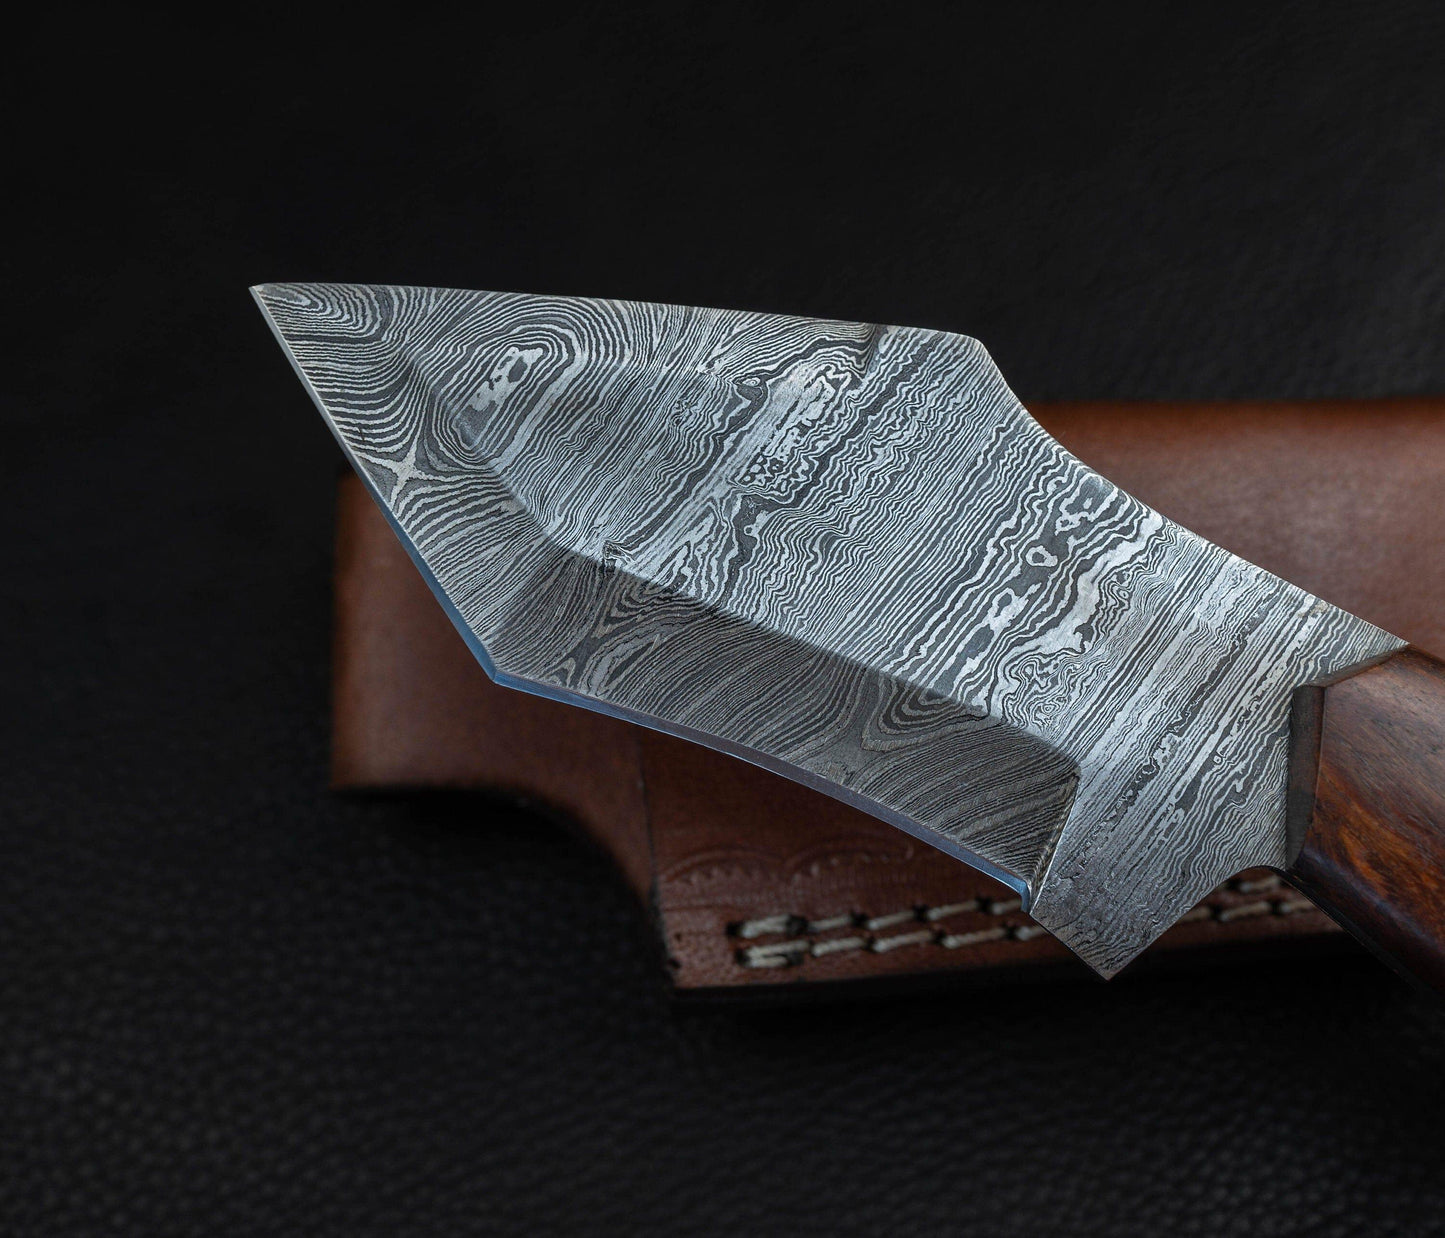 Damascus Hunting Knife, Damascus Fixed Blade Knife, Damascus Gut Hook Knife, Damascus Skinner Knife Hand Made Knives, Gift For Father 2021 Etsy 